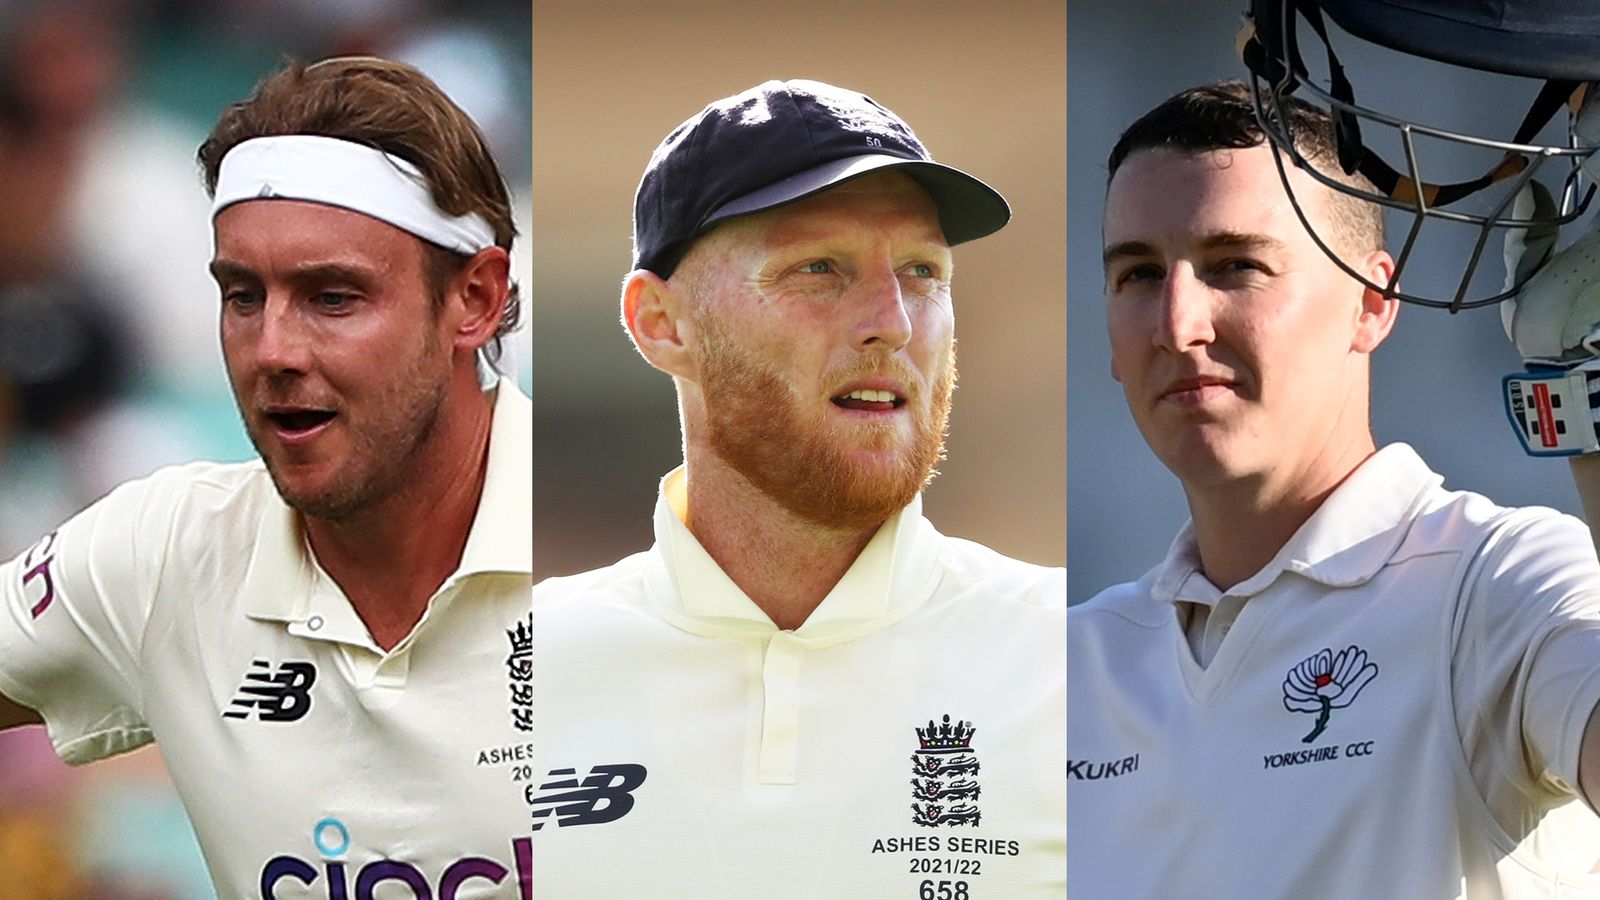 James Anderson and Stuart Broad return in Brendon McCullum's first England squad for New Zealand Tests